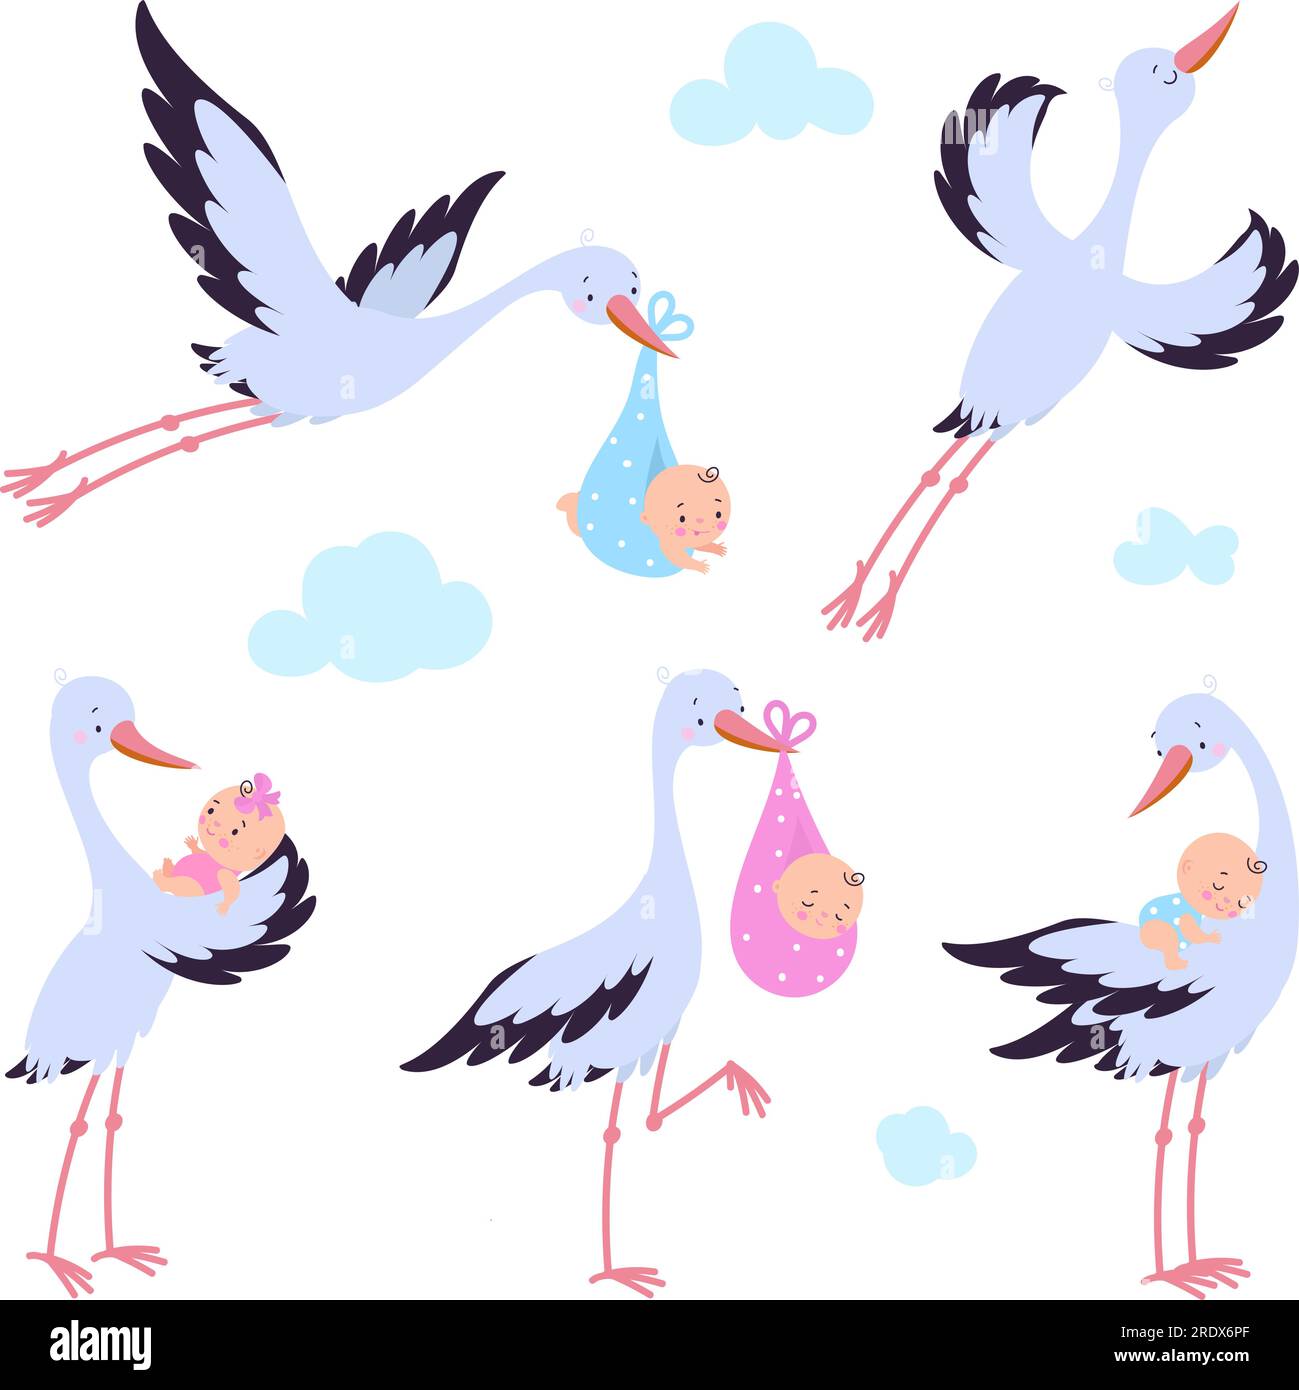 Cartoon flying storks with newborn. Bird migration, stork hold babies and fly. Cute baby shower graphic elements, birth nowaday vector characters Stock Vector